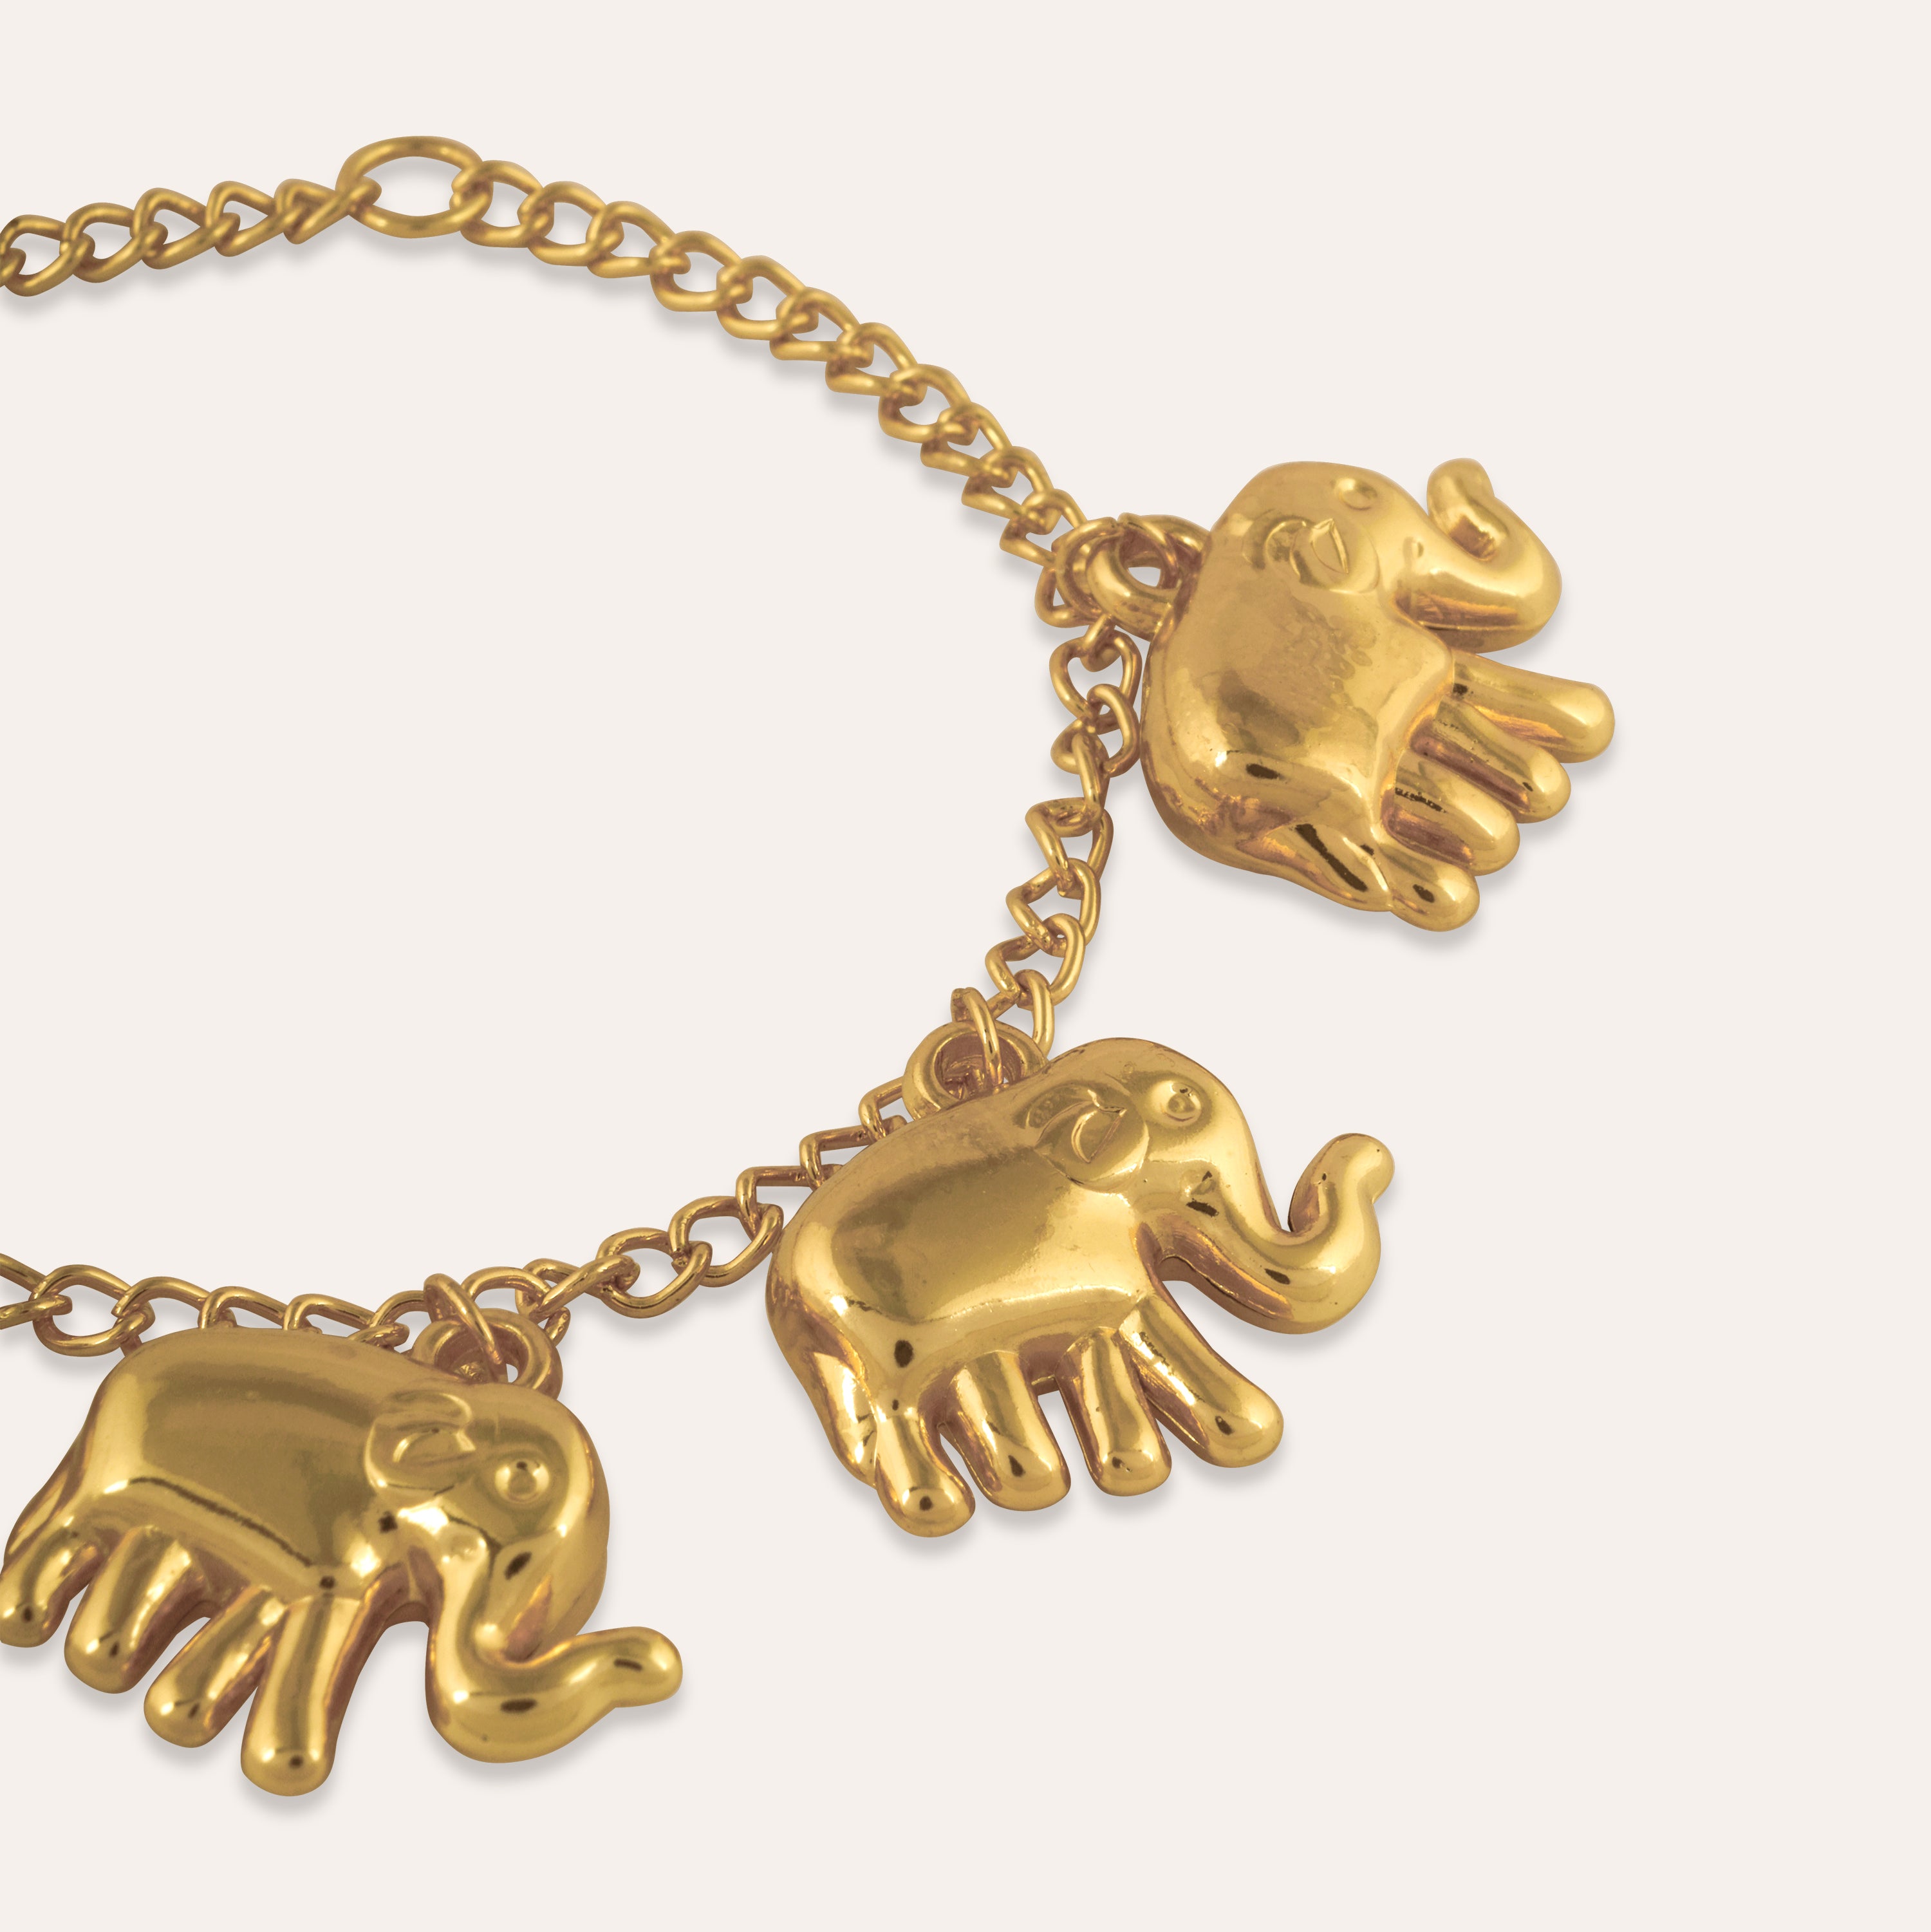 Buy Gold Elephant Bracelet, Good Luck Elephant Bracelet, Women's Elephant  Bracelet, 14k Heavy Plated Gold, Lifetime Replacement Guarantee Online in  India - Etsy